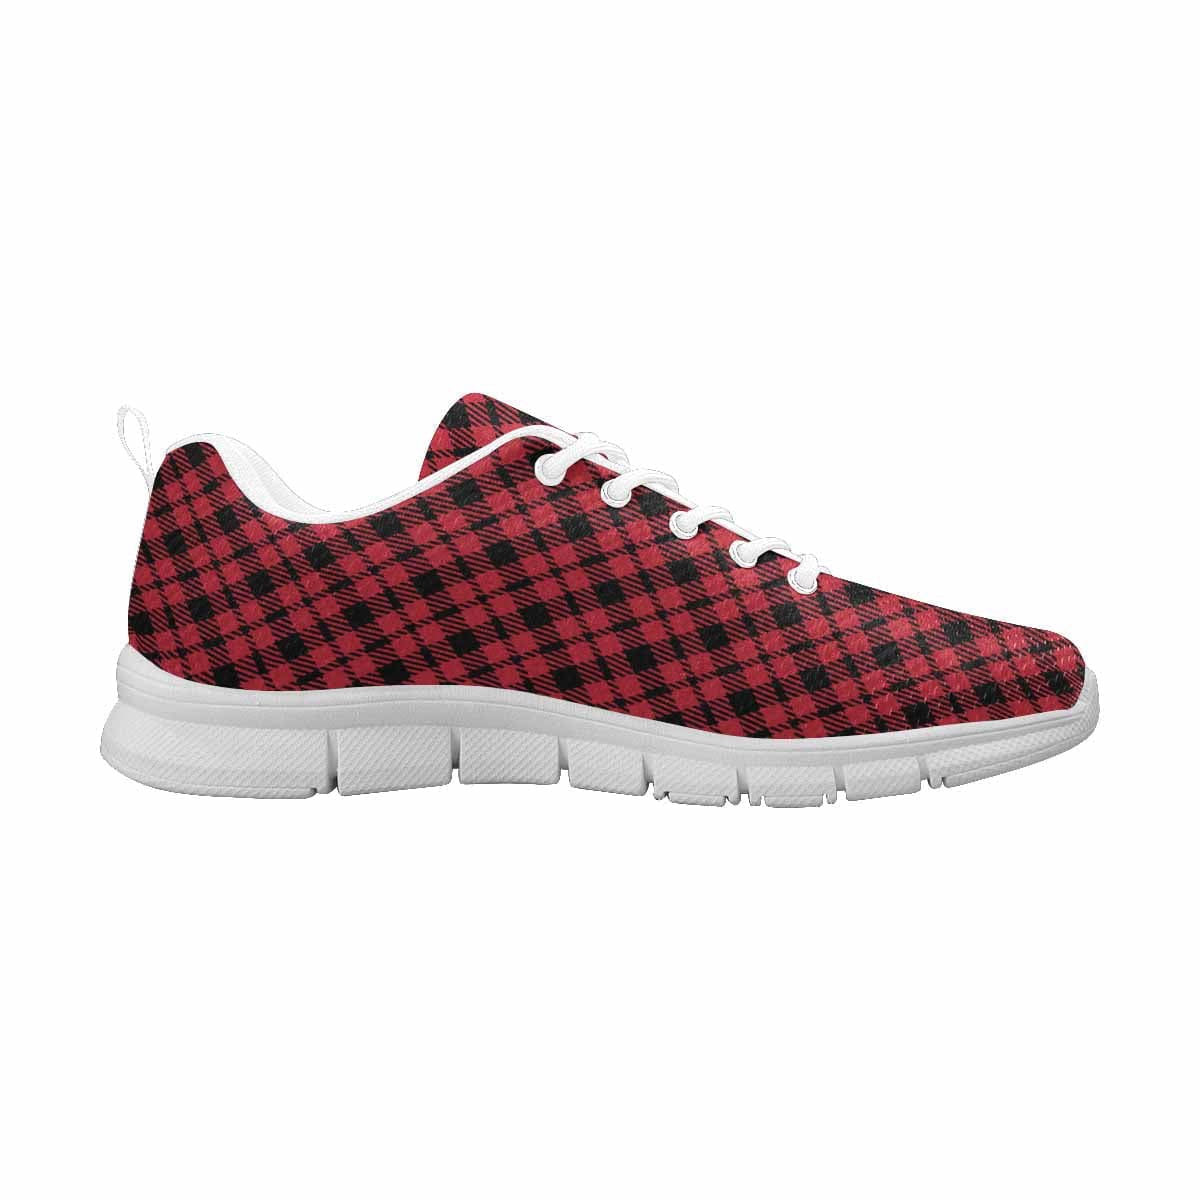 Sneakers For Men Buffalo Plaid Red And Black - Running Shoes Dg841 - Mens |